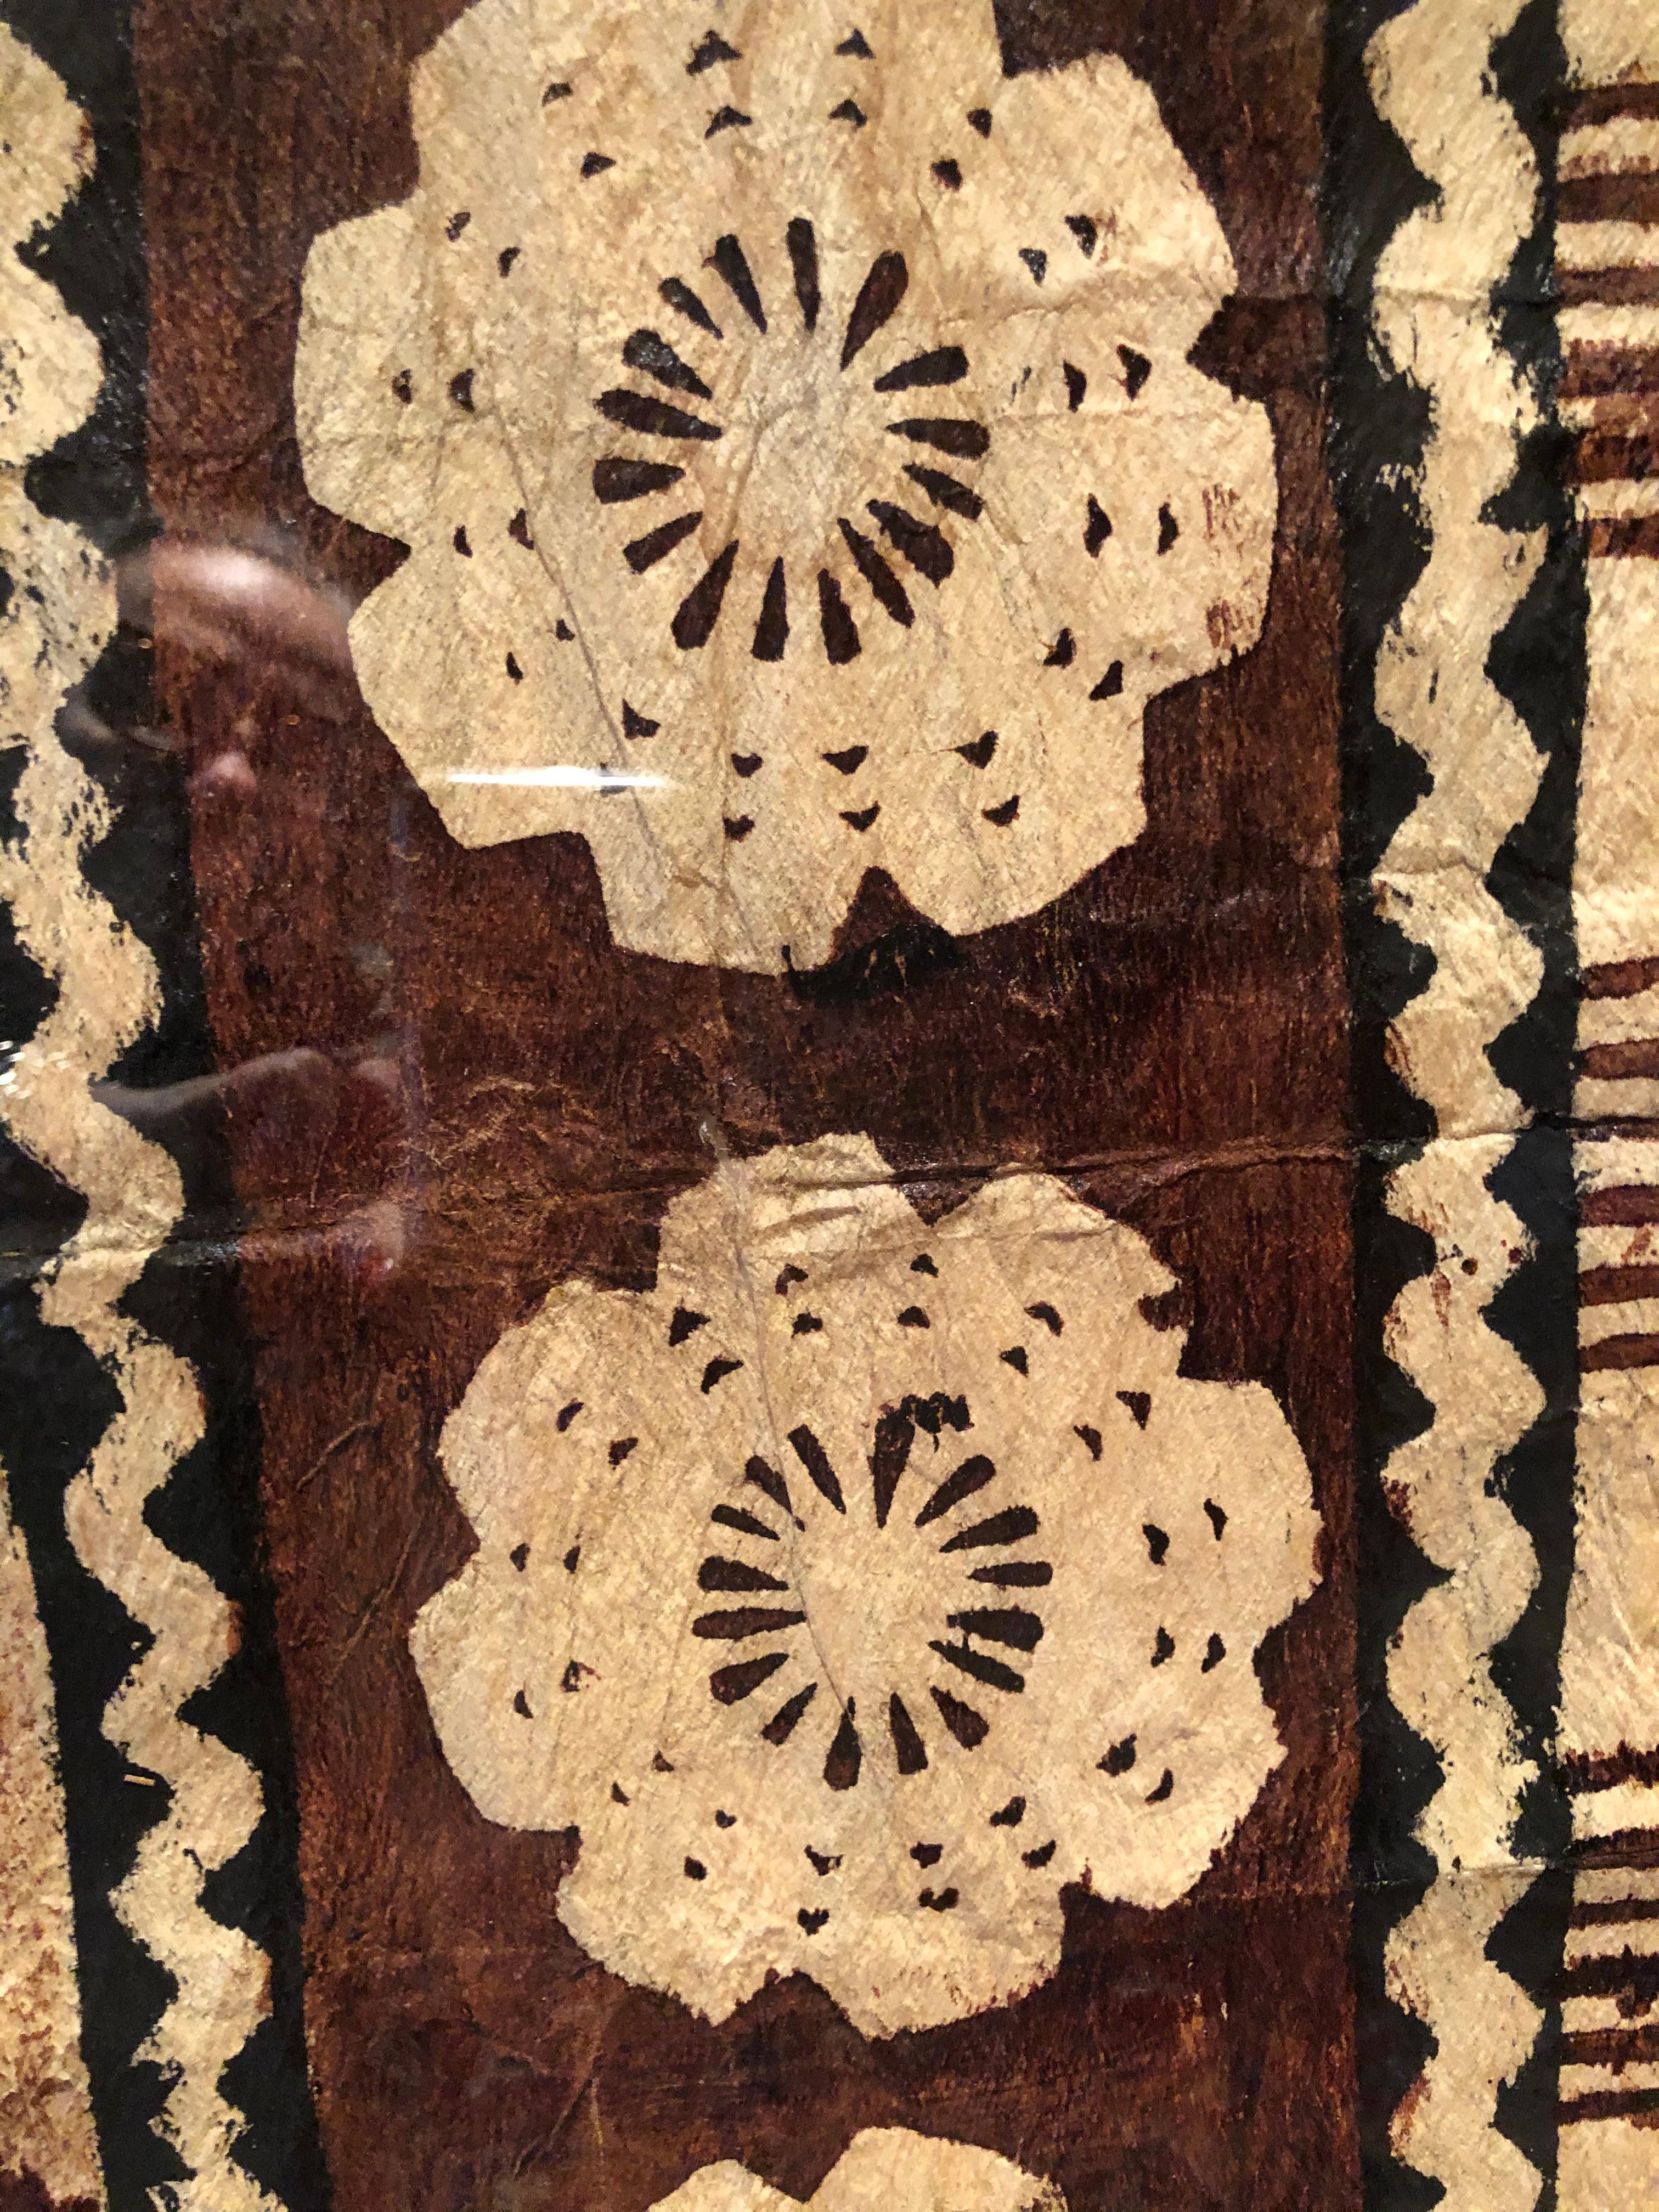 Incredible painting on tree bark from Fiji where the bark cloth is historically beaten from fibrous vines and then painted. The various designs reference the natural environment. Custom framed.